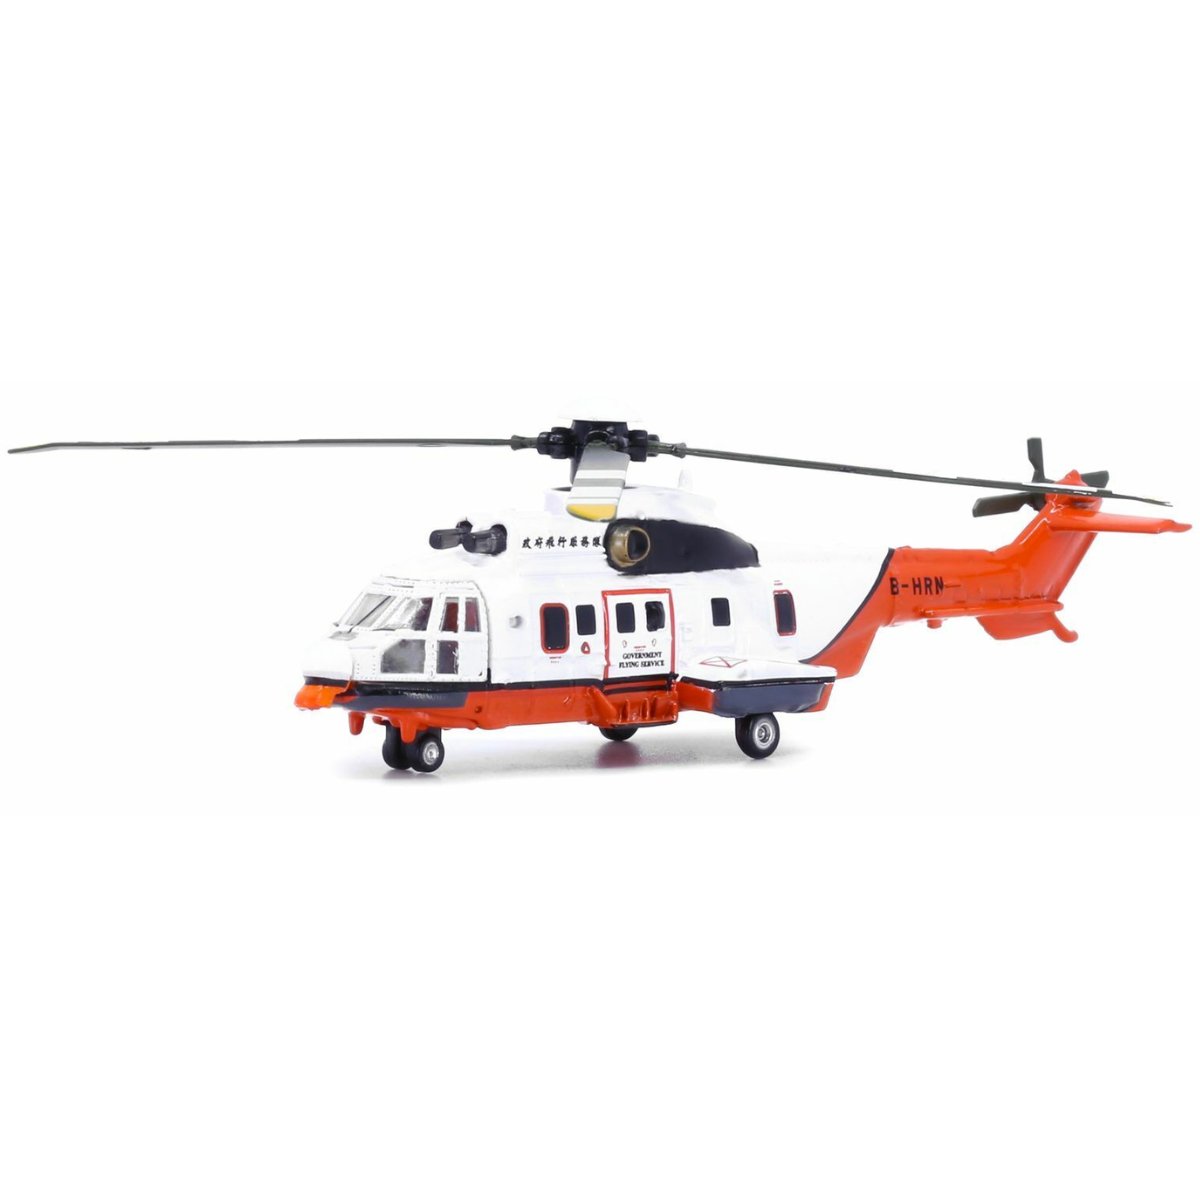 Tiny Models HKGFS Supa Puma Helicopter (1:144 Scale) - Phillips Hobbies